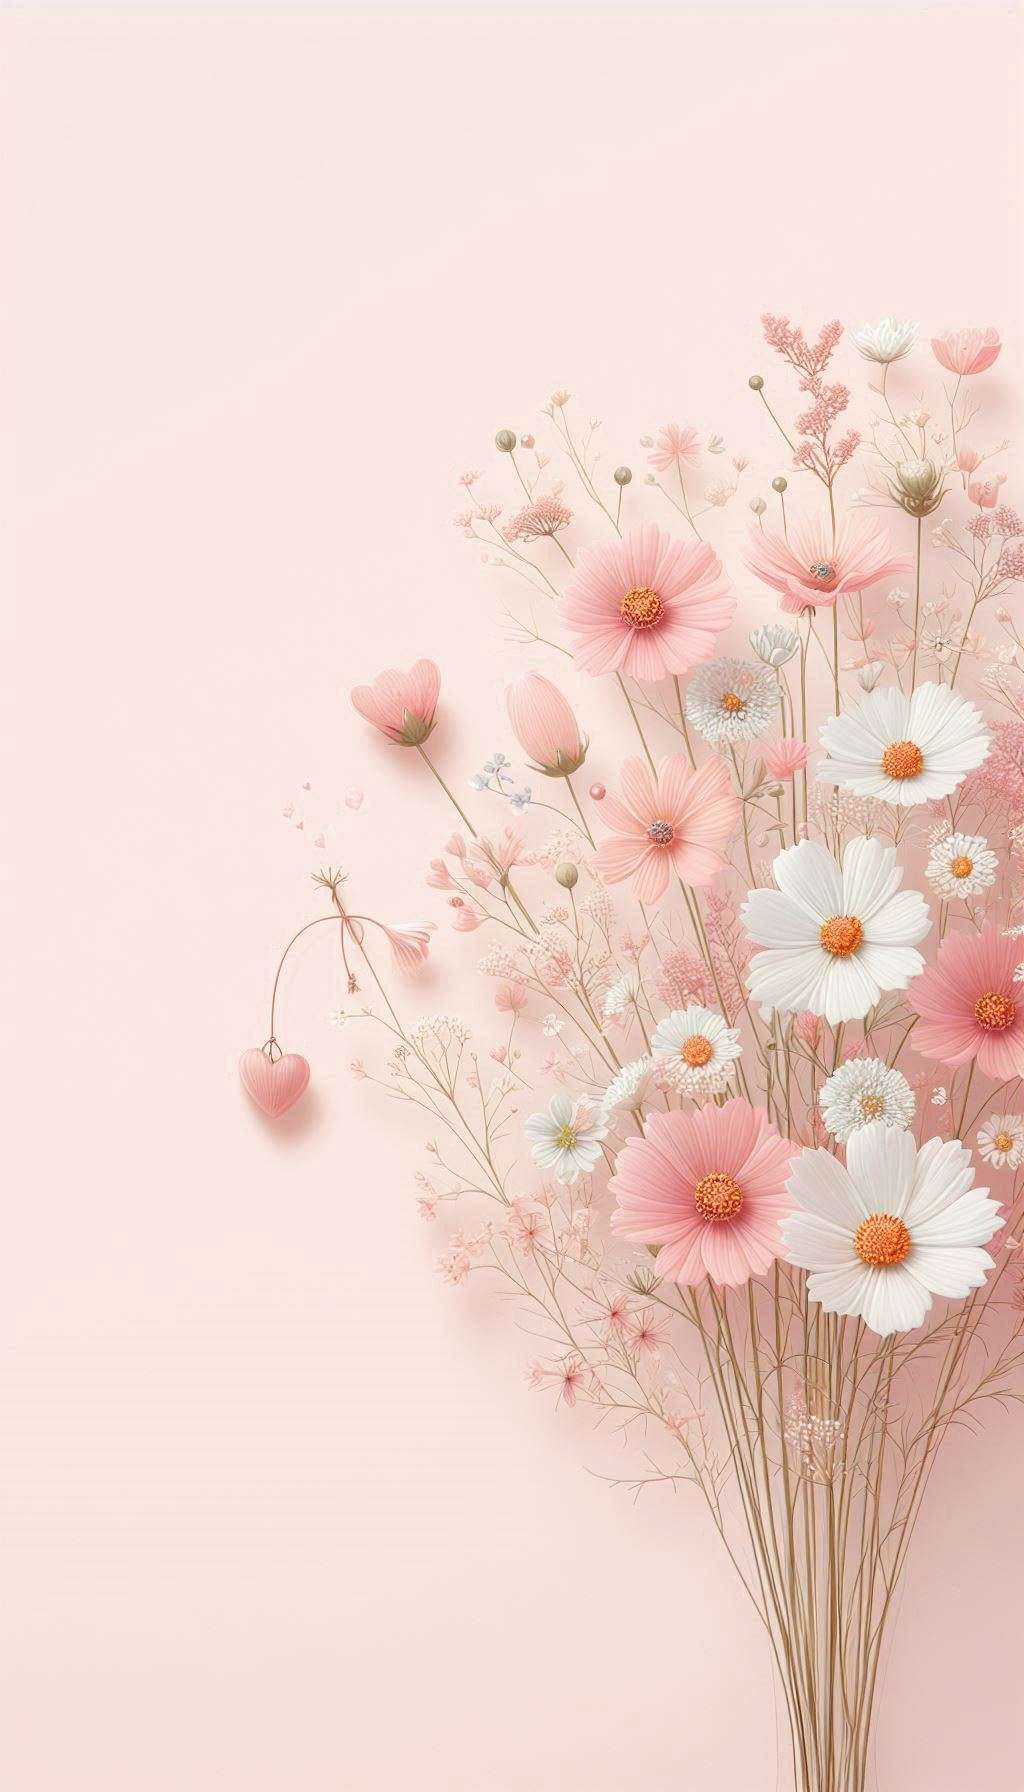 Download Free light pink background with flower pattern for websites, slideshows, and designs | royalty-free and unlimited use.